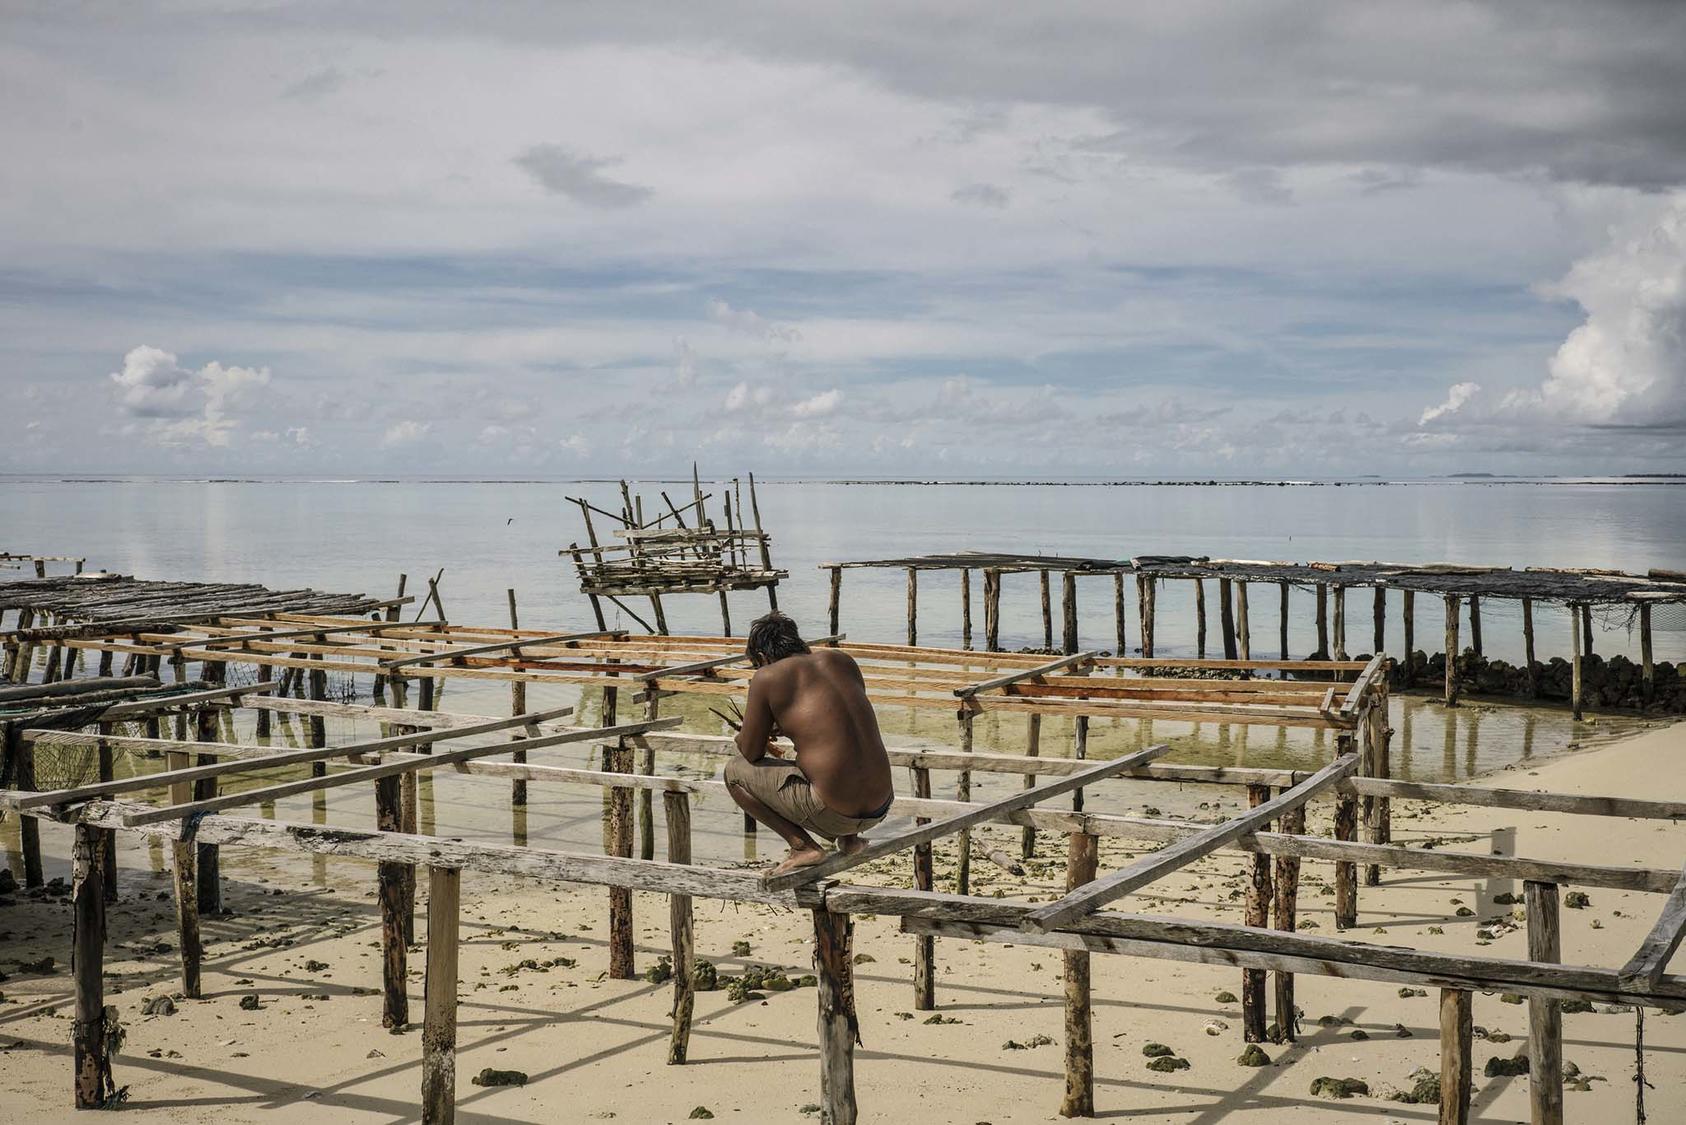 A seaweed drying dock in Beniamina Island, part of the Solomon Islands, June 5, 2018. In many parts of the Solomon Islands, land has disappeared, drowned by heaving currents and rising seas. (Adam Ferguson/The New York Times)